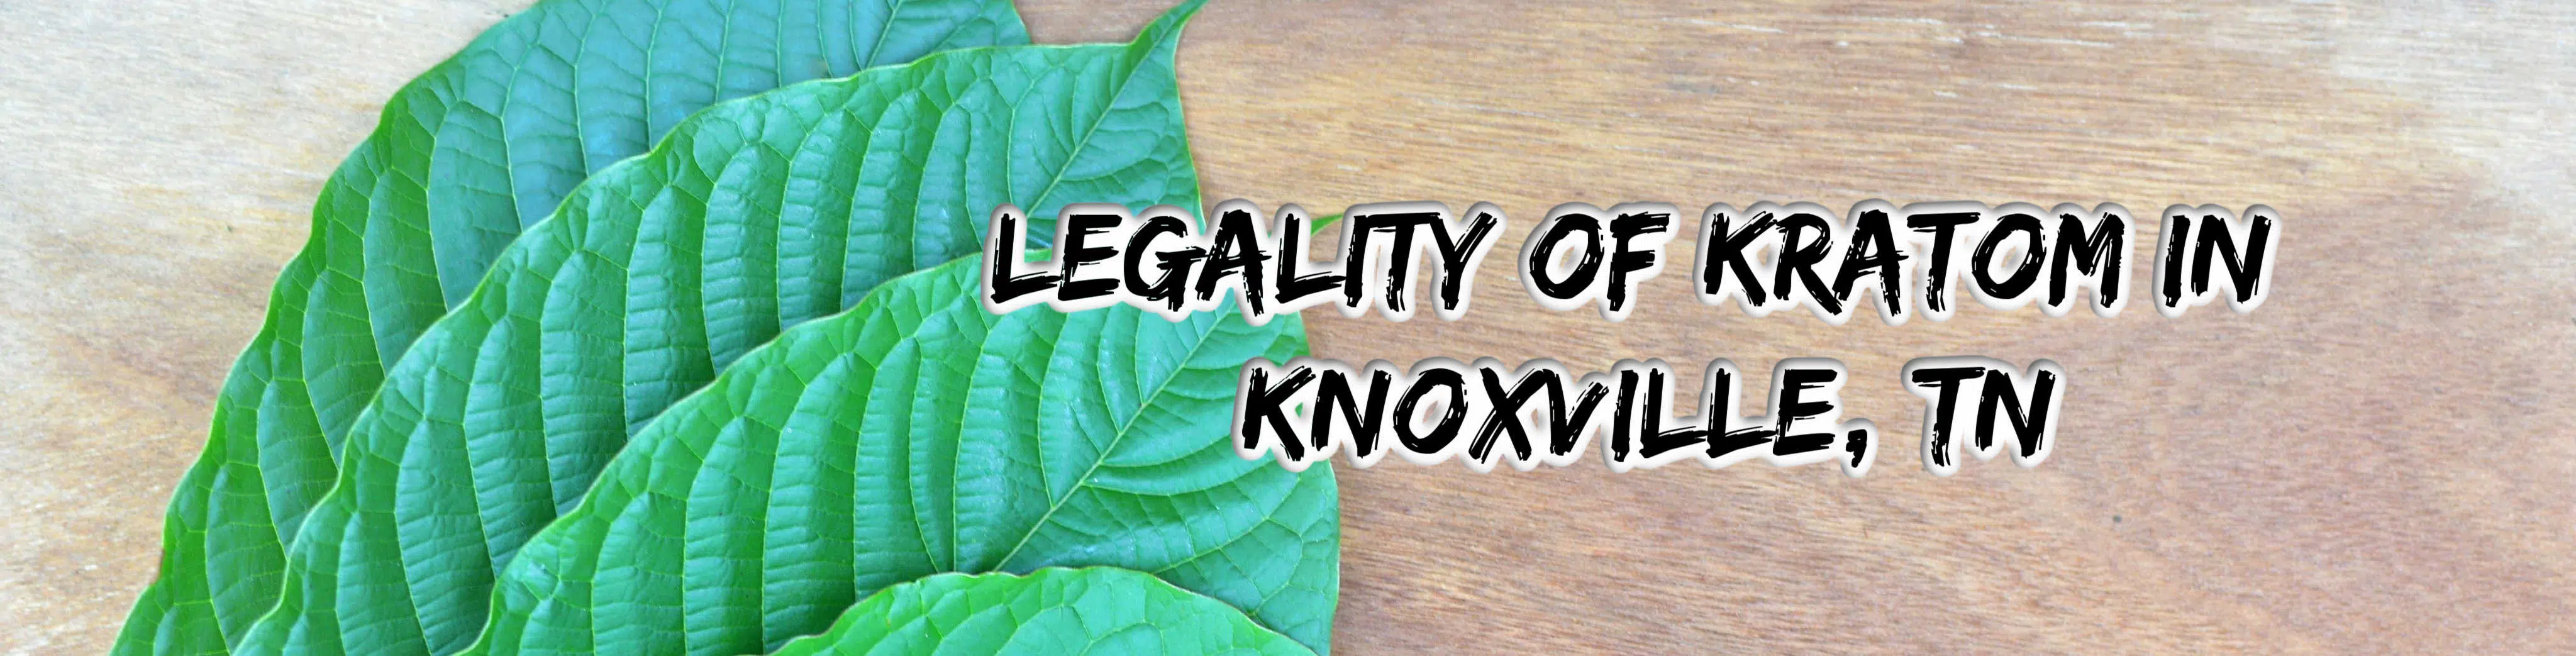 image of kratom legality in knoxville